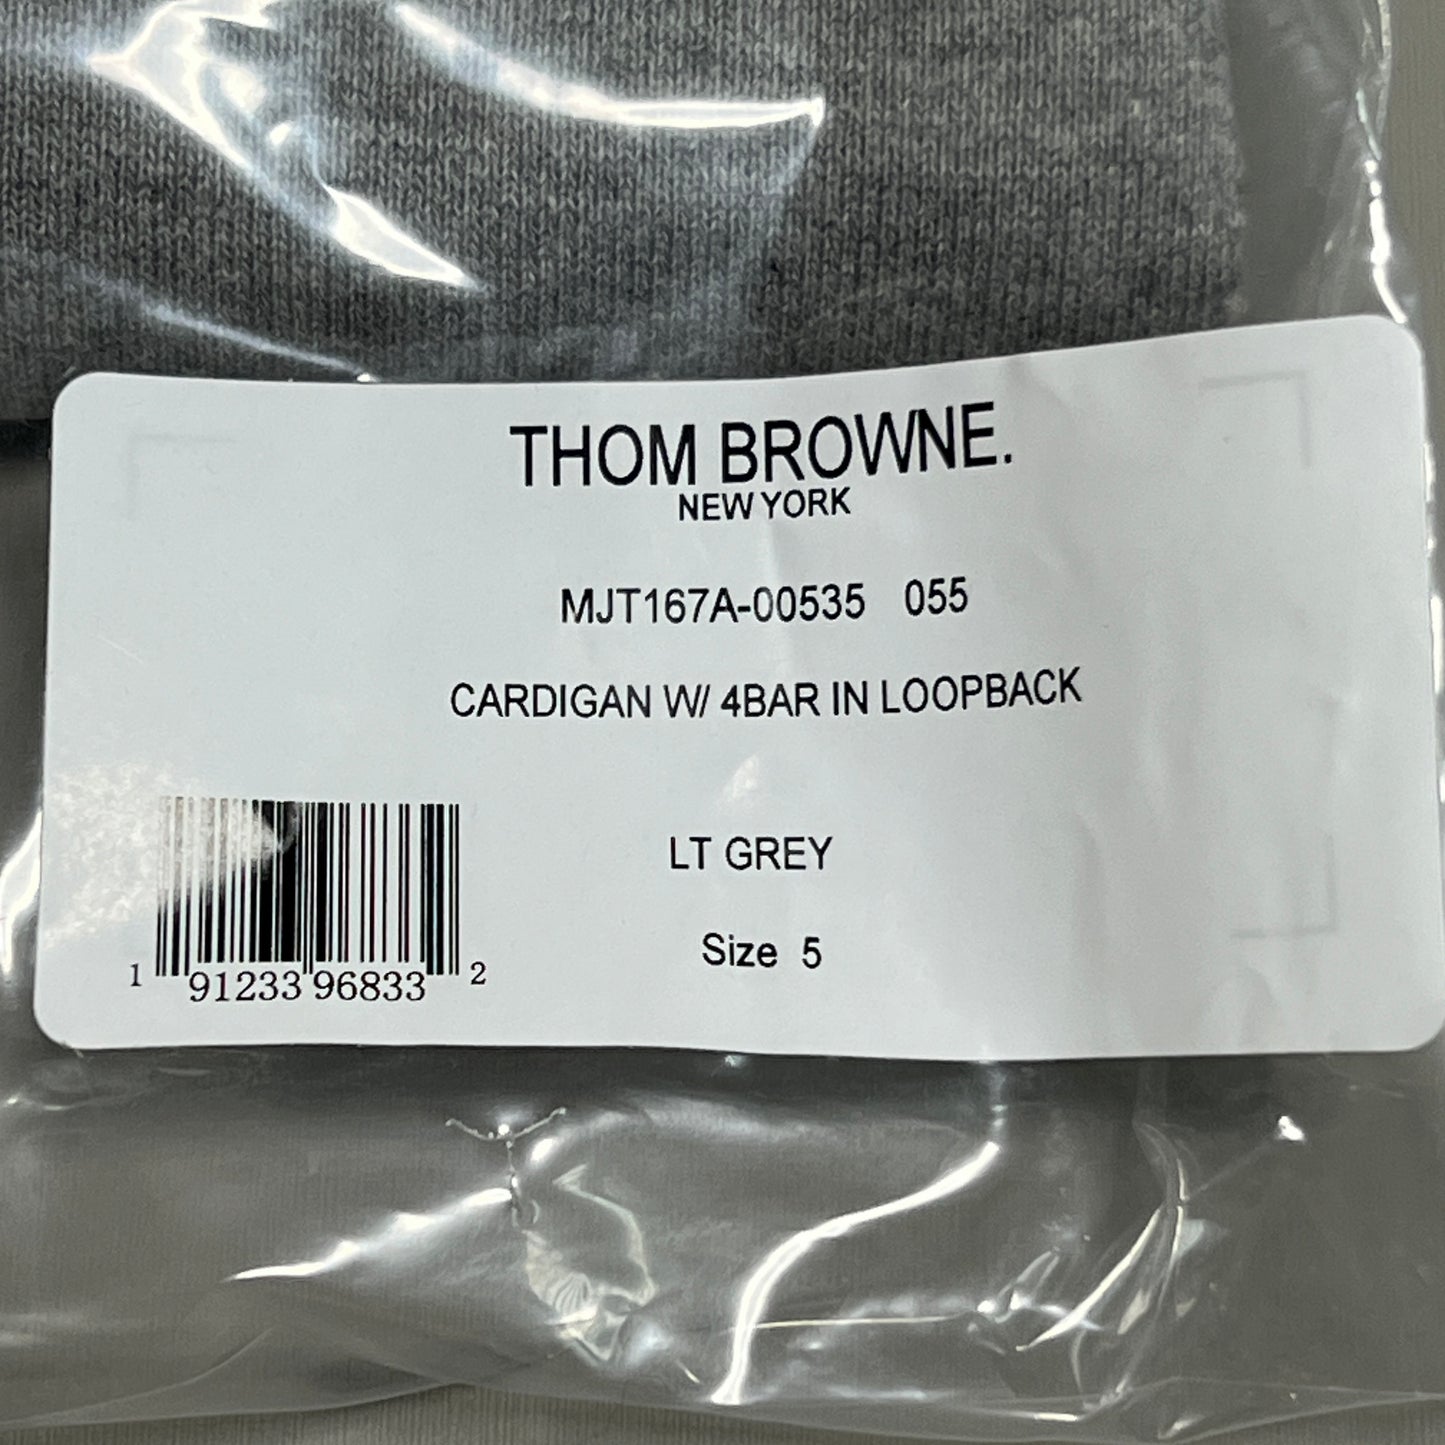 THOM BROWNE V-NECK Cardigan w/ 4Bar in Jersey Loopback Light Grey Size 5 (New)